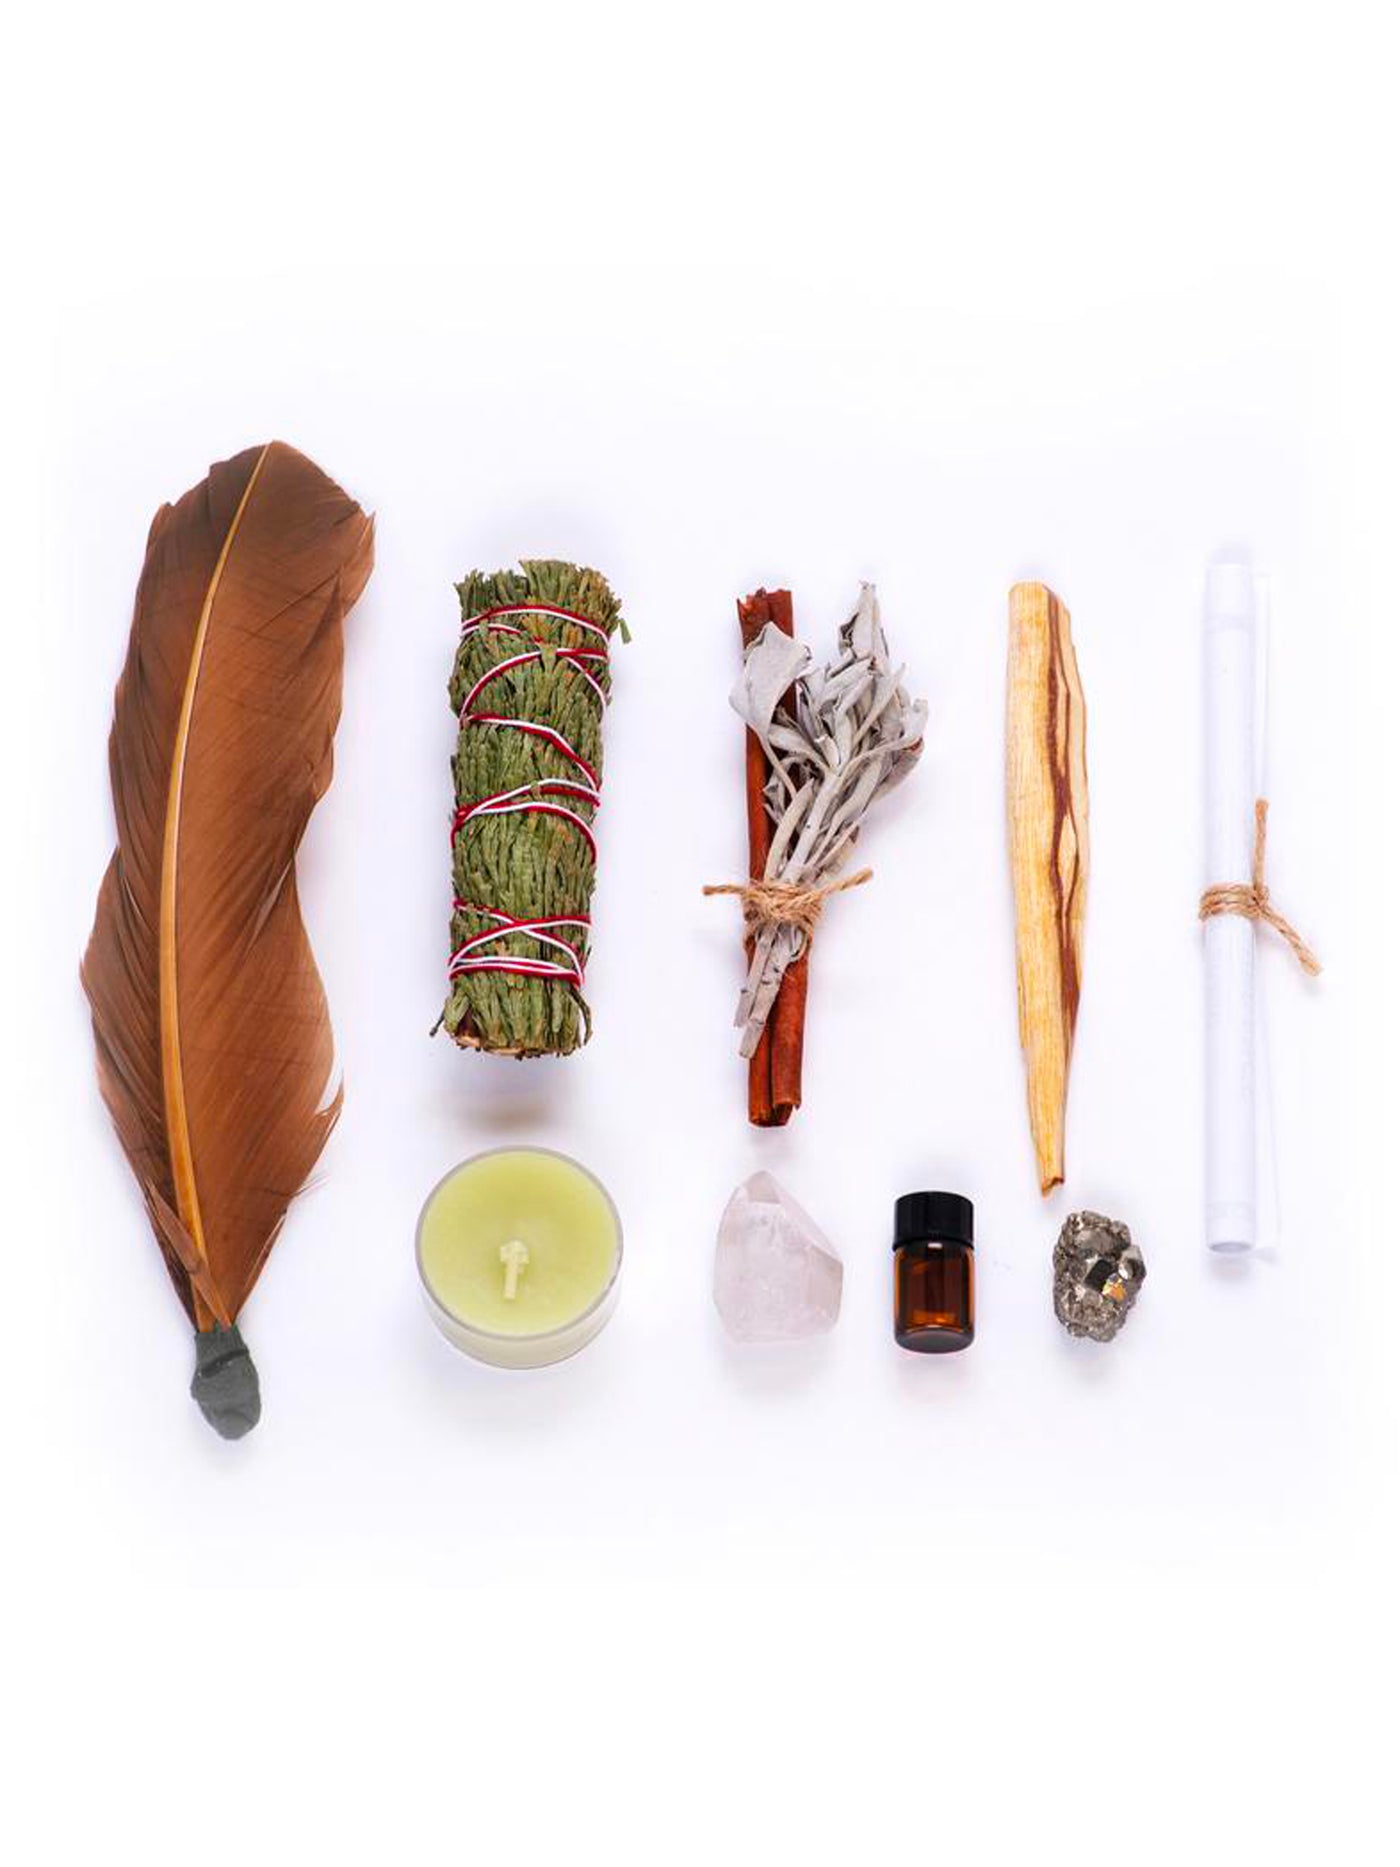 This Ritual Kit includes: California white sage sprig, Cinnamon stick, Cedar leaf stick, Patchouli essential oil, Pyrite ("fools gold") cluster or cube, One or two quartz crystals (depending on size/ weight), Green candle, Holy palo santo wood from South America, and a Turkey feather.